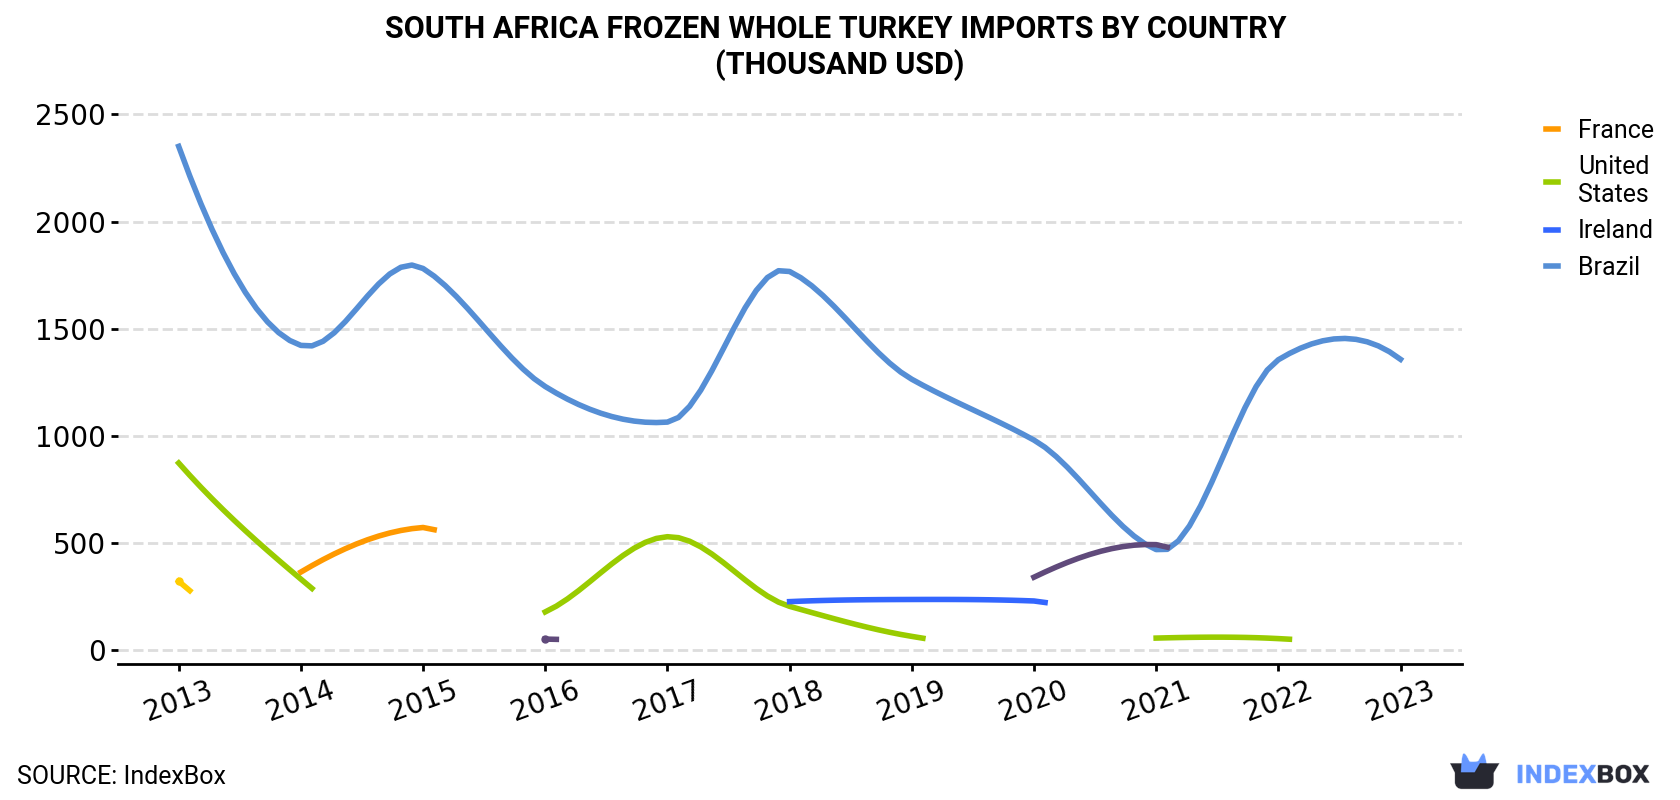 South Africa Frozen Whole Turkey Imports By Country (Thousand USD)